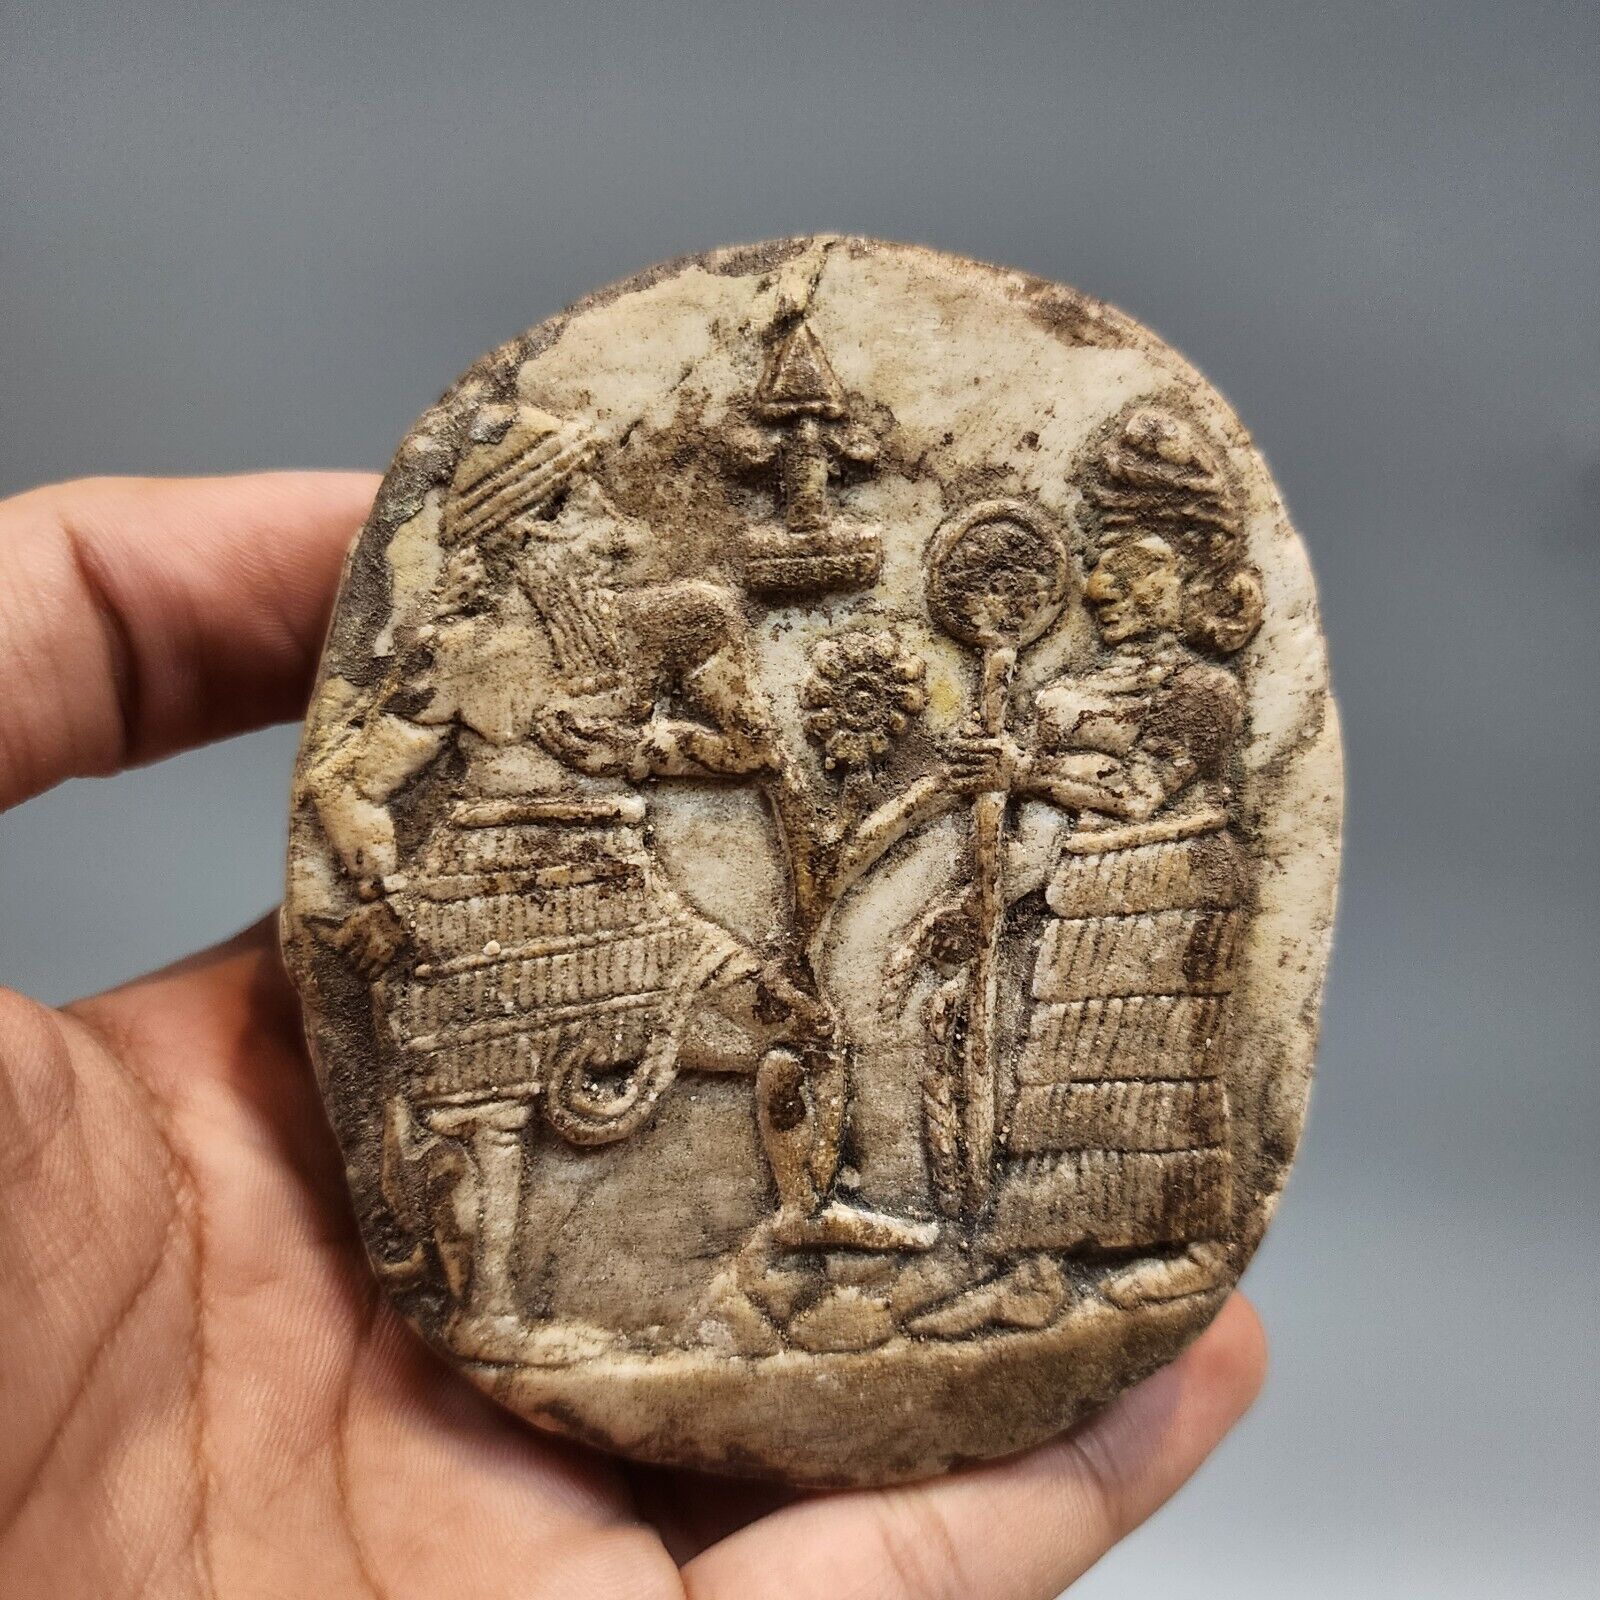 AN IMPORTANT ASSYRIAN ALABASTER STONE PLAQUE WITH STORY SCENES.